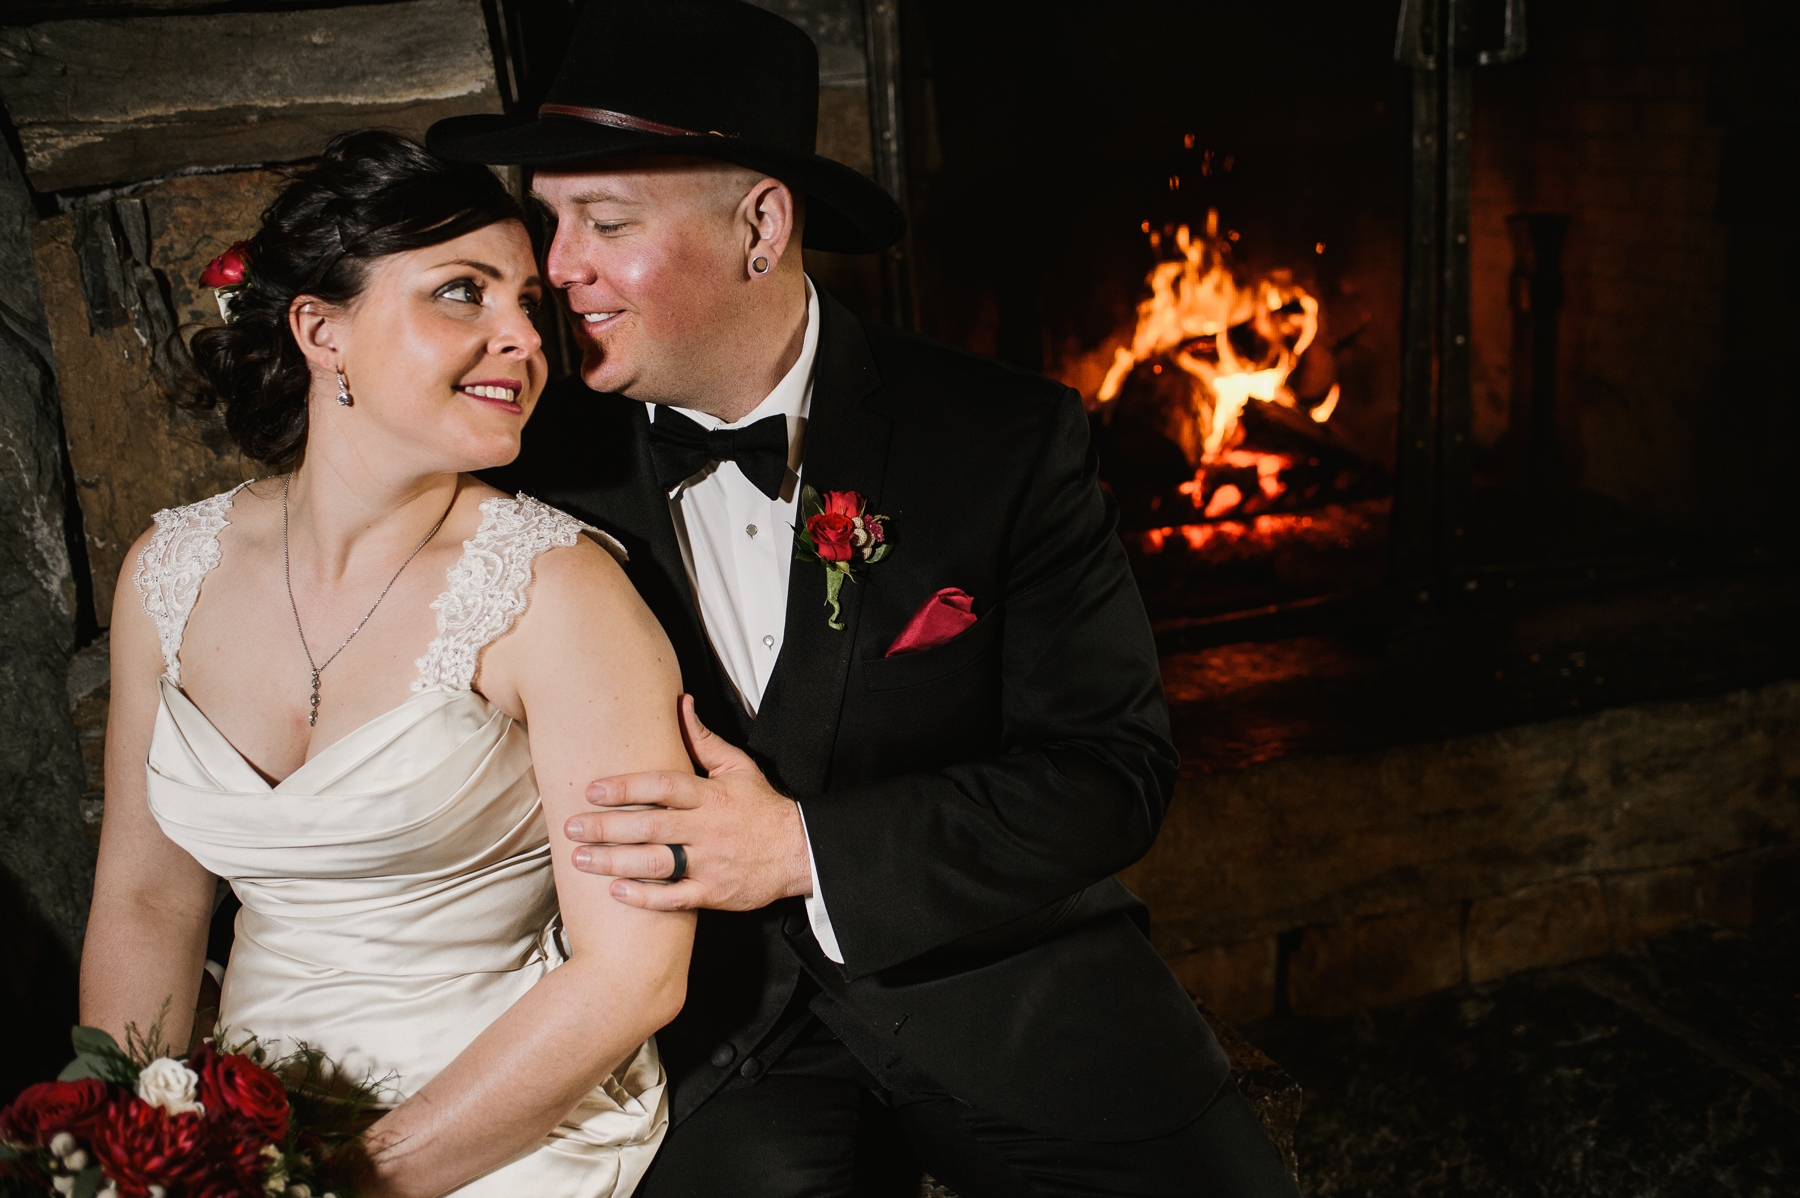 moonlight lodge tavern fire place bride and groom